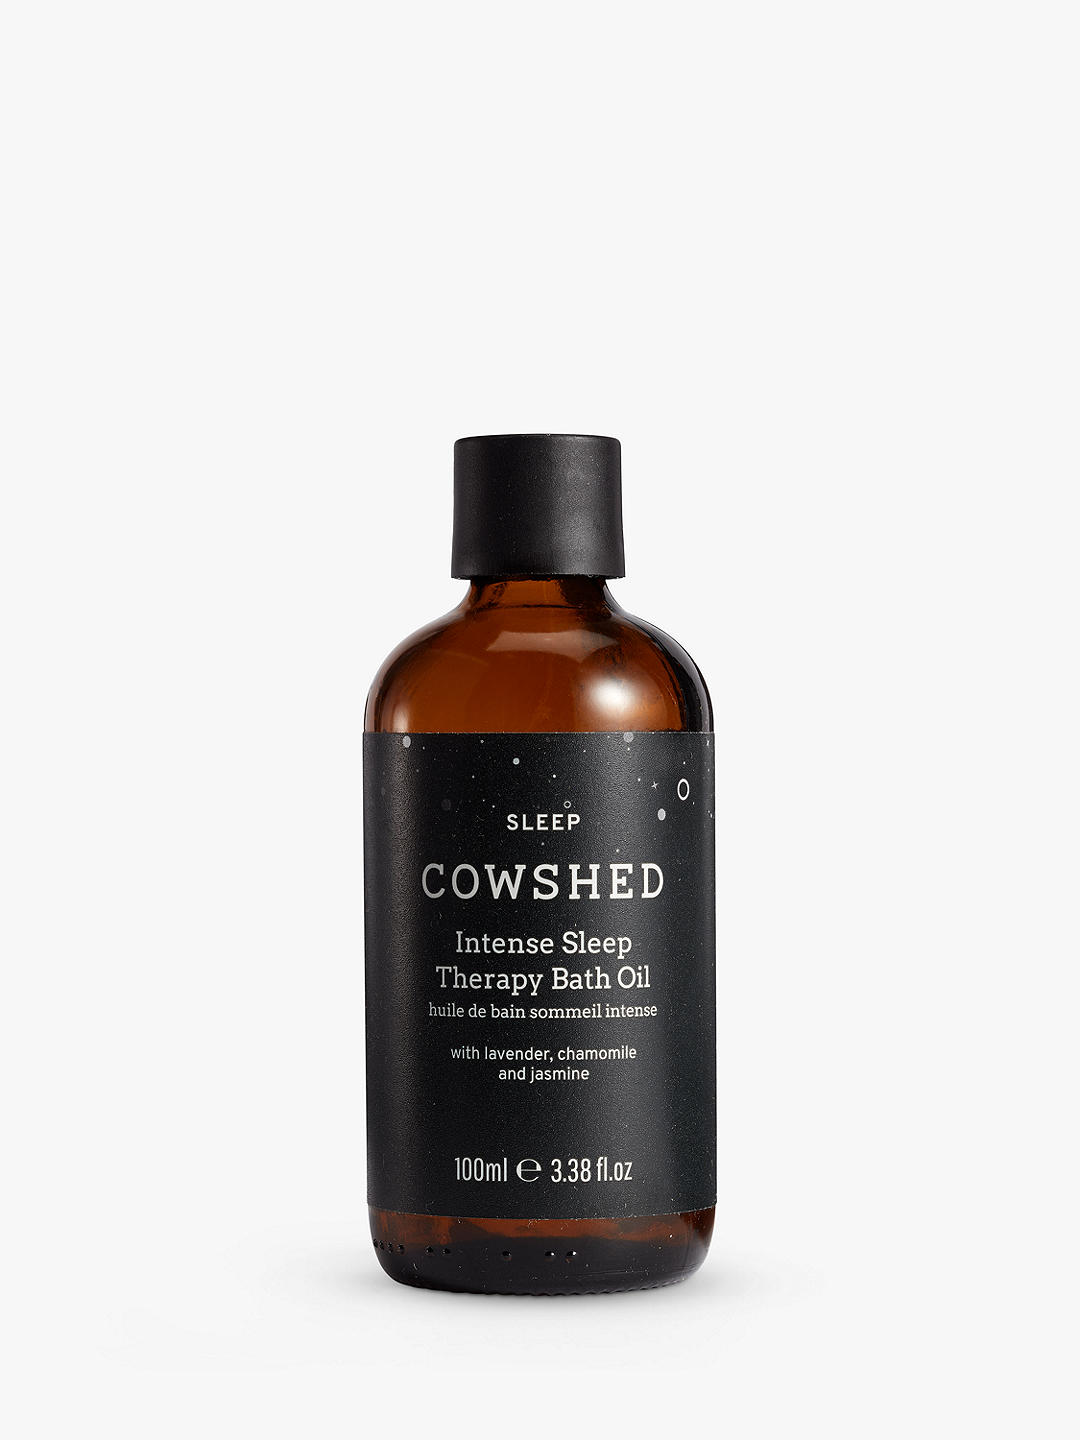 Cowshed Intense Sleep Therapy Bath Oil, 100ml 1